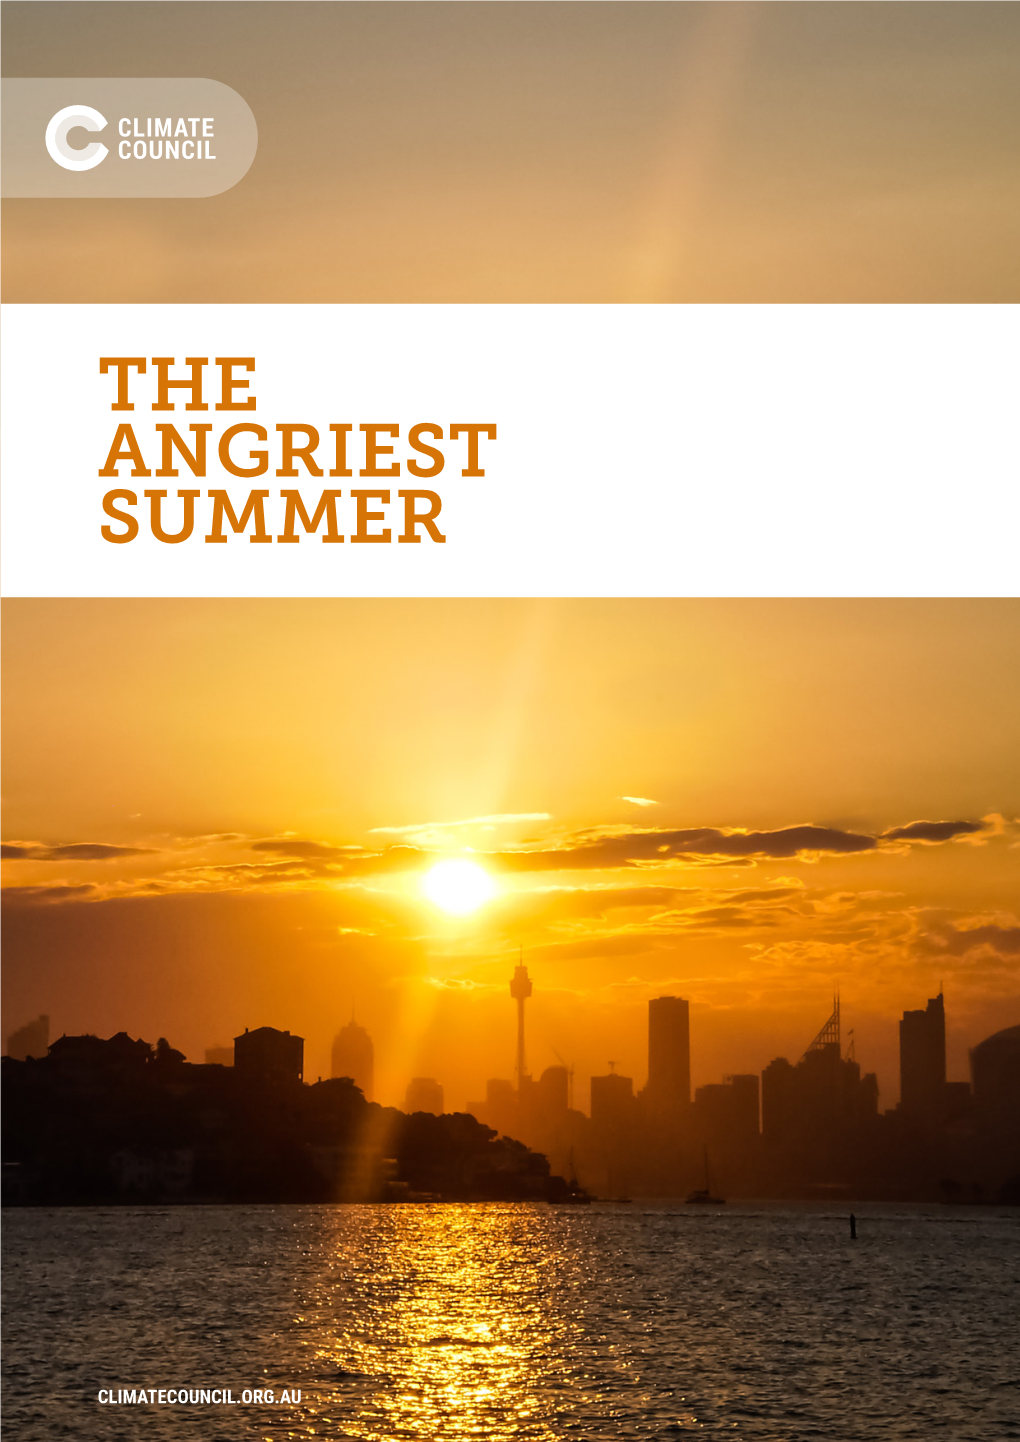 The Angriest Summer